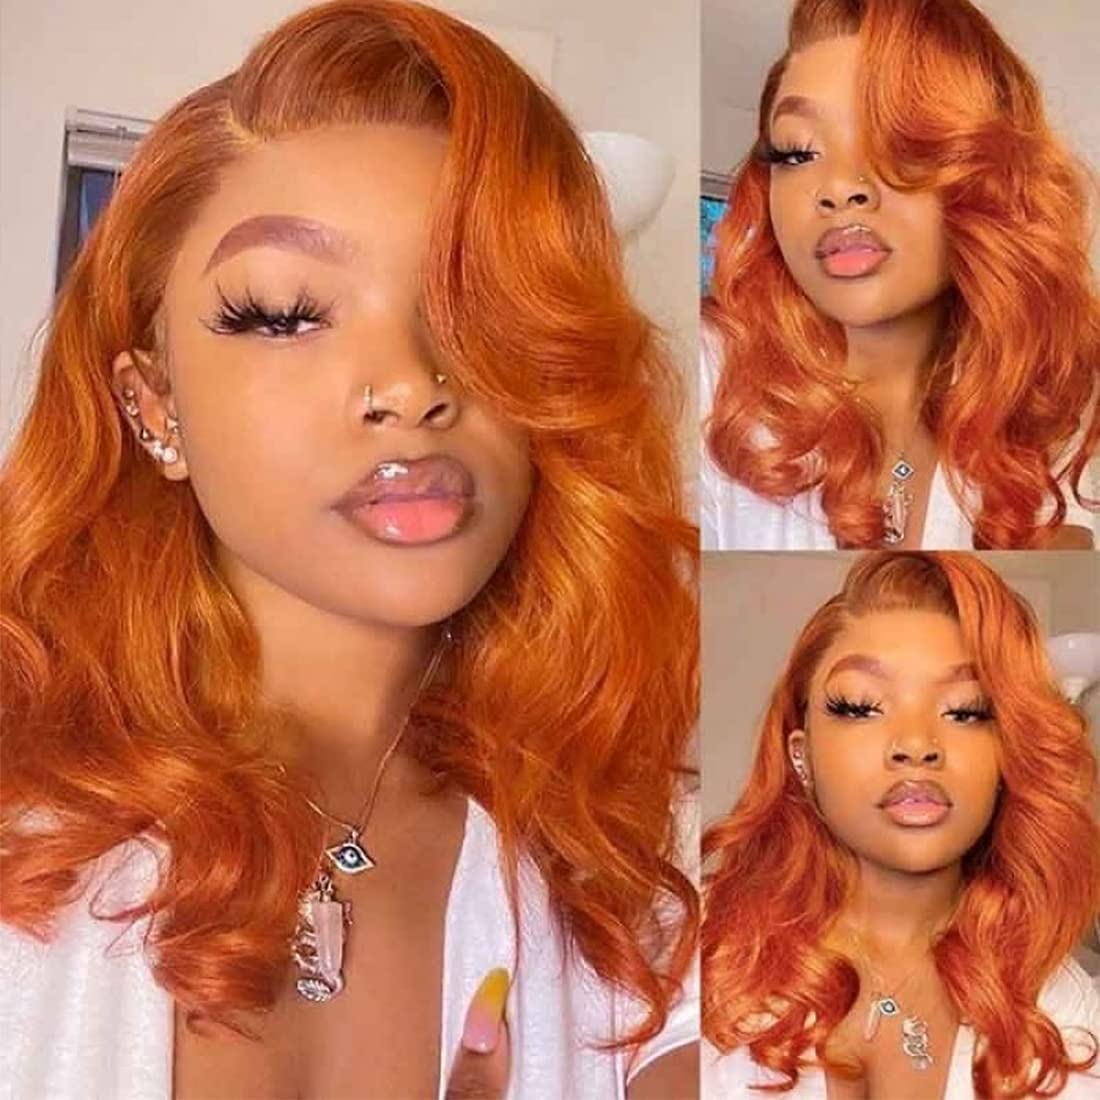 Ginger Orange Color 13x4 Lace Frontal Wig Straight/Body Wave Human Hair Wigs Free Part